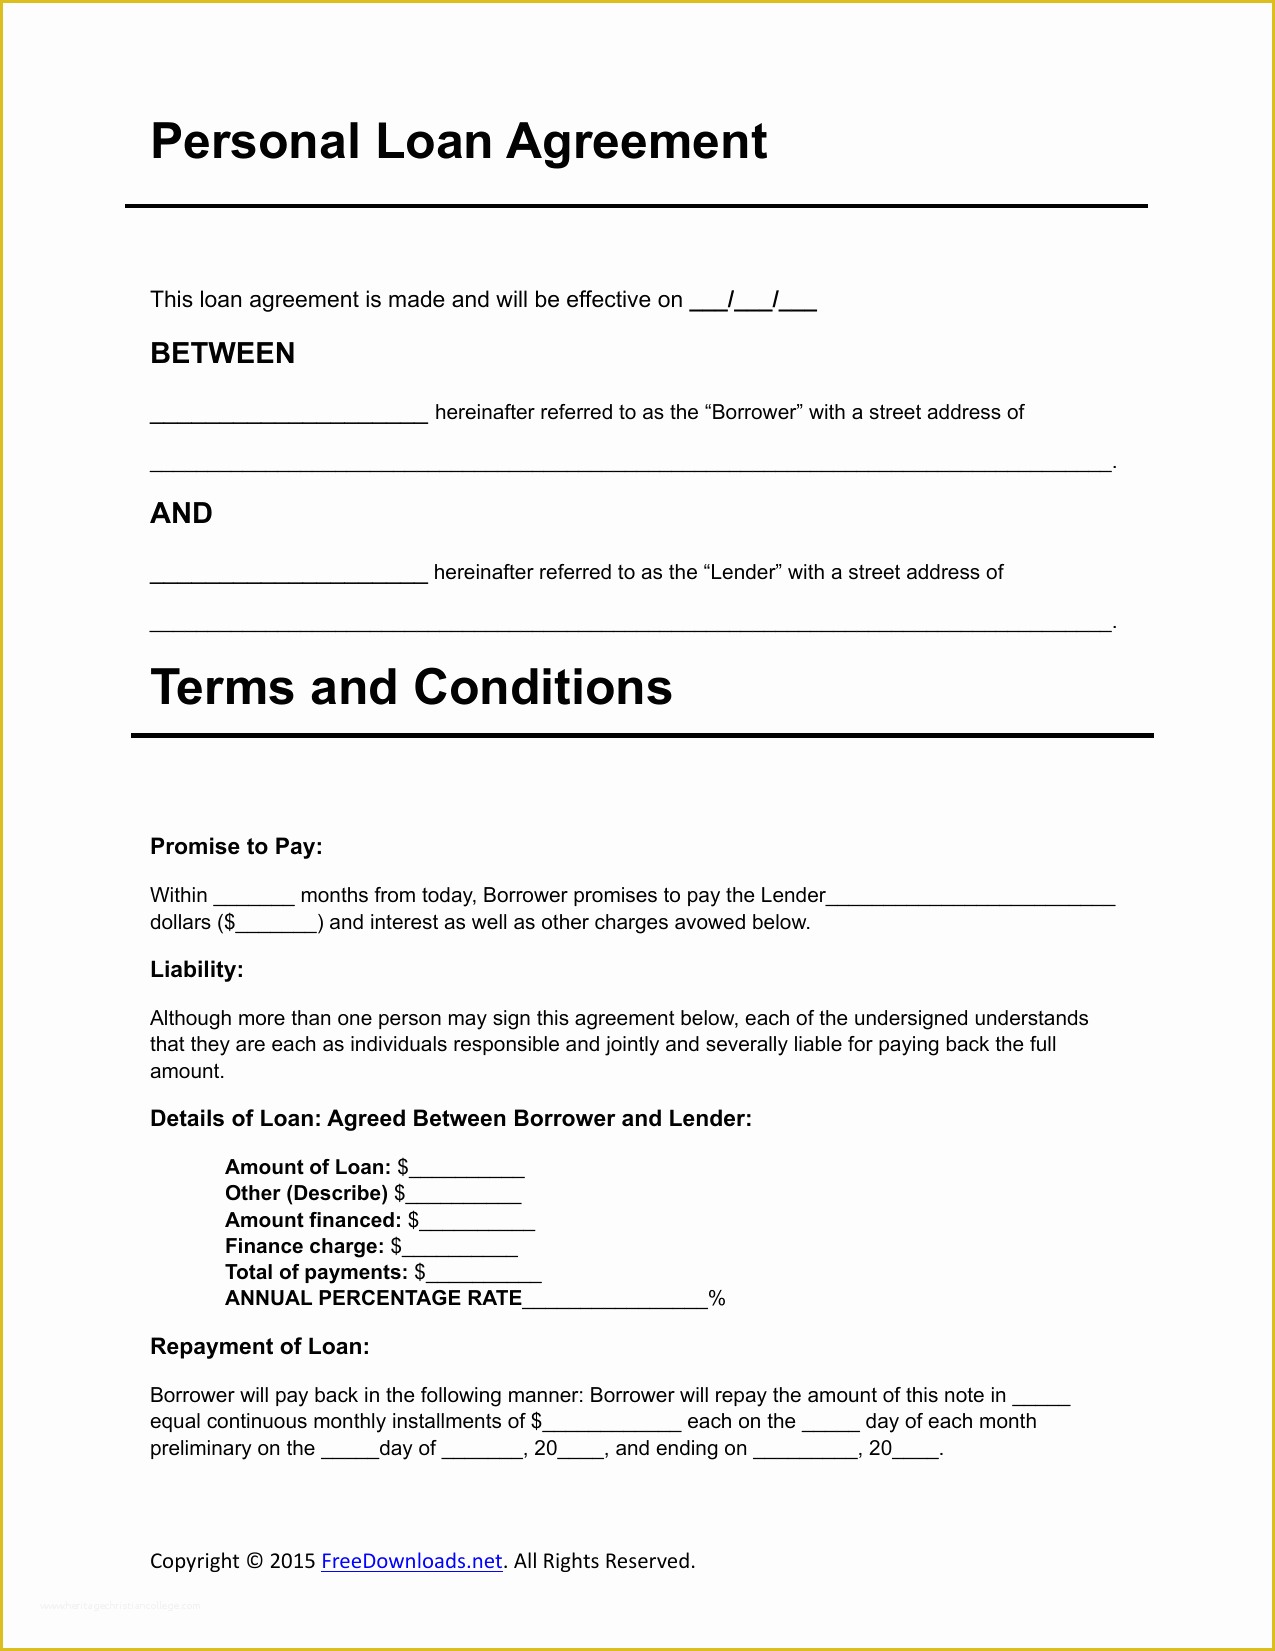 Free Loan Agreement Template Of Download Personal Loan Agreement Template Pdf